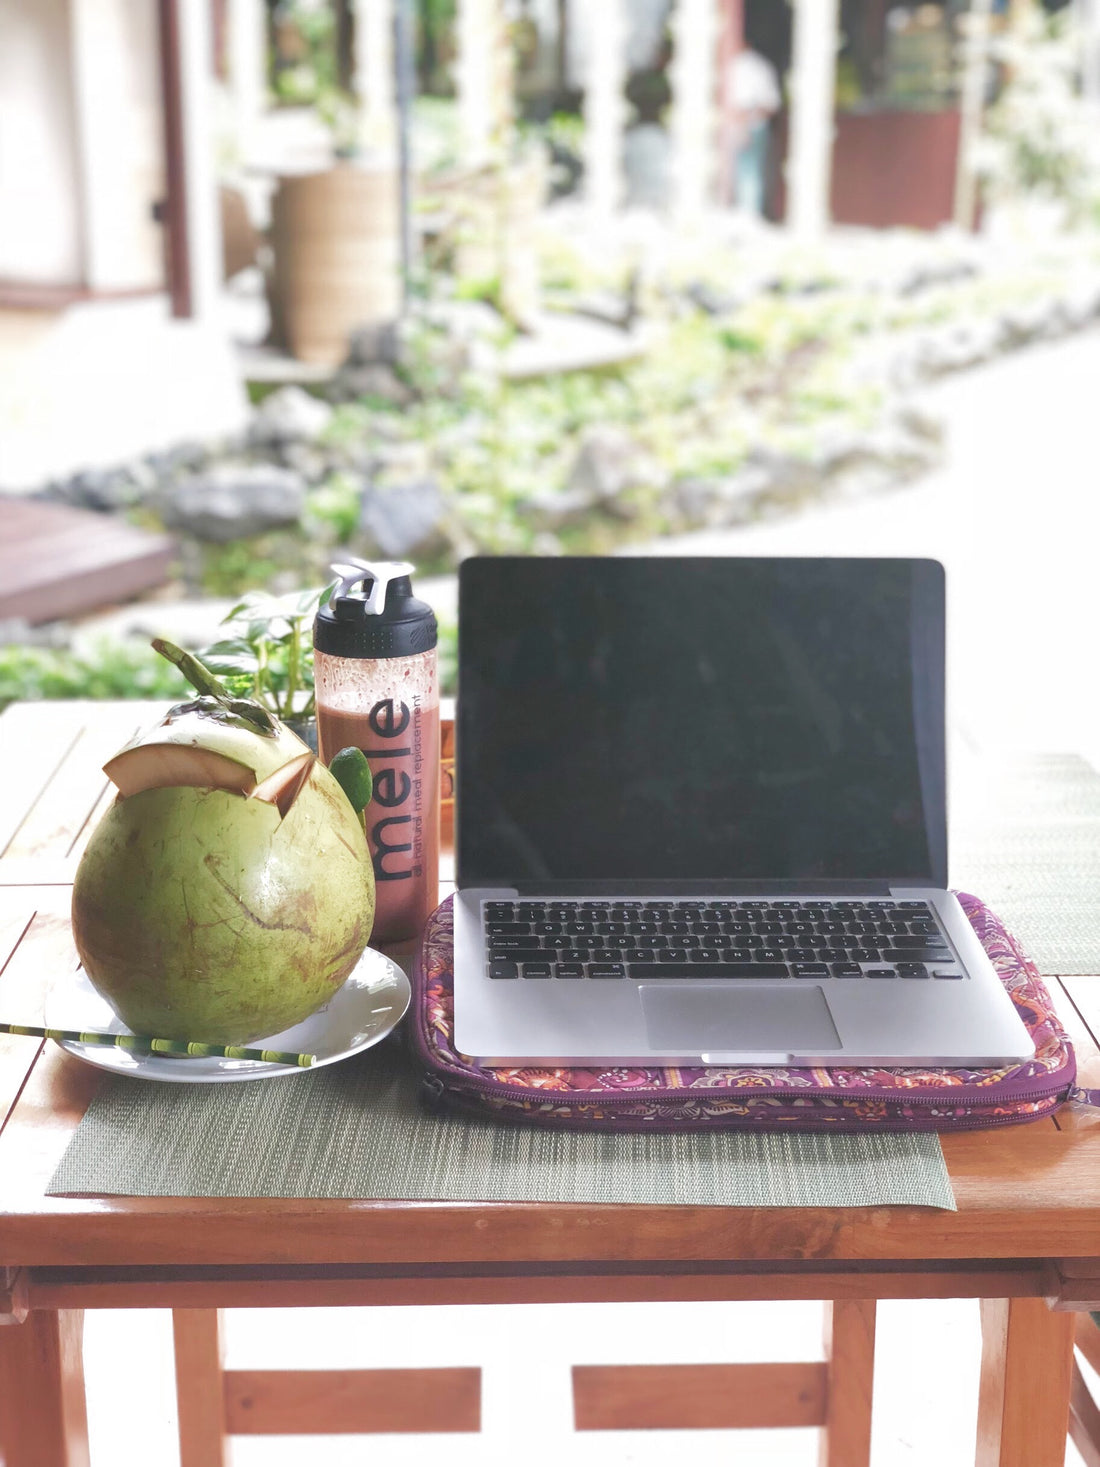 HOW THIS DIGITAL NOMAD STAYS BALANCED